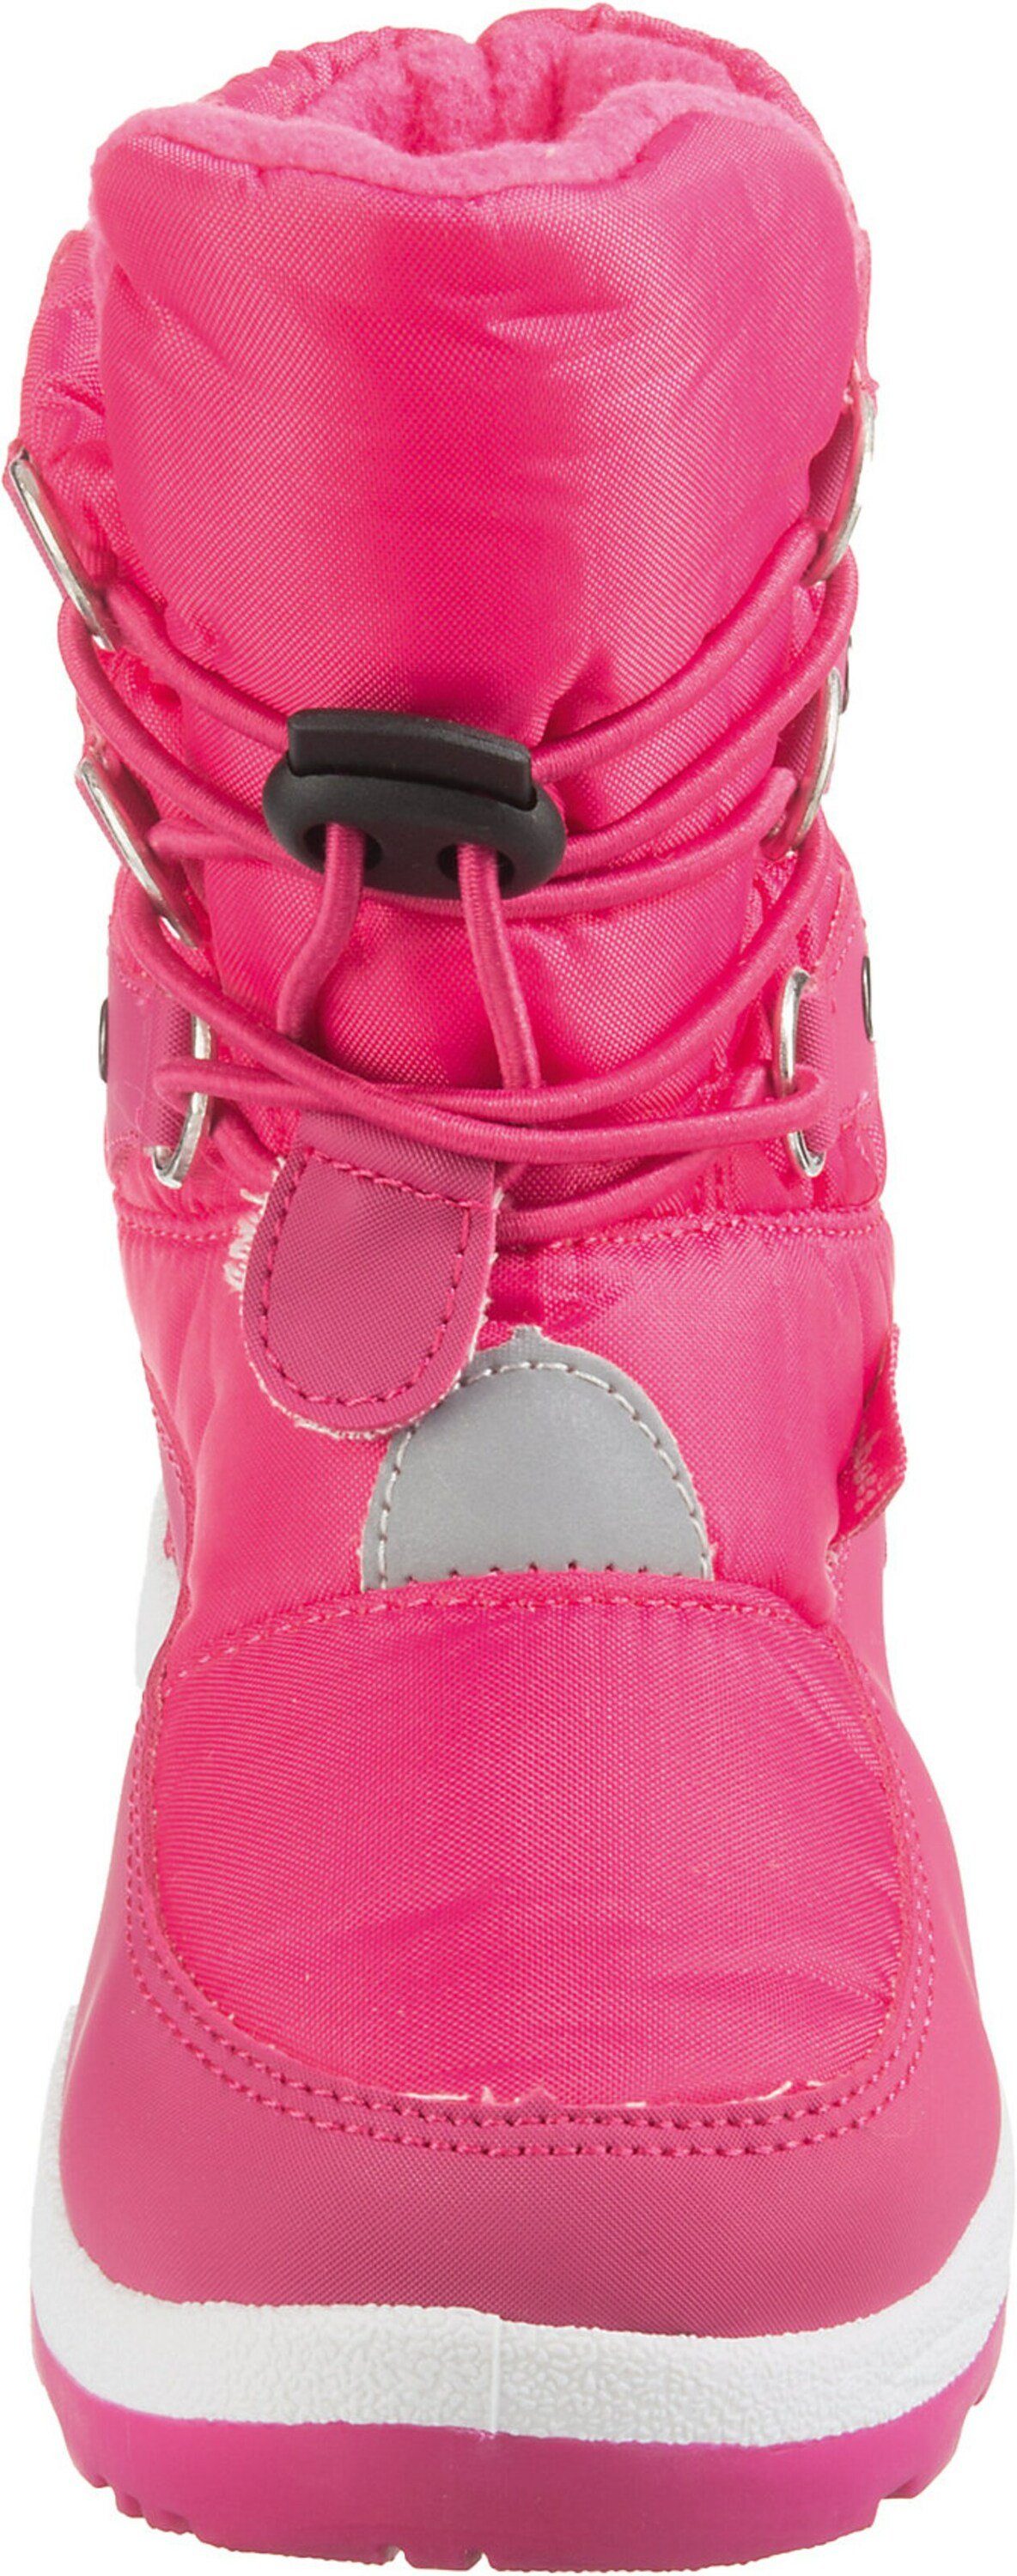 (1-tlg) Playshoes Snowboots Pink